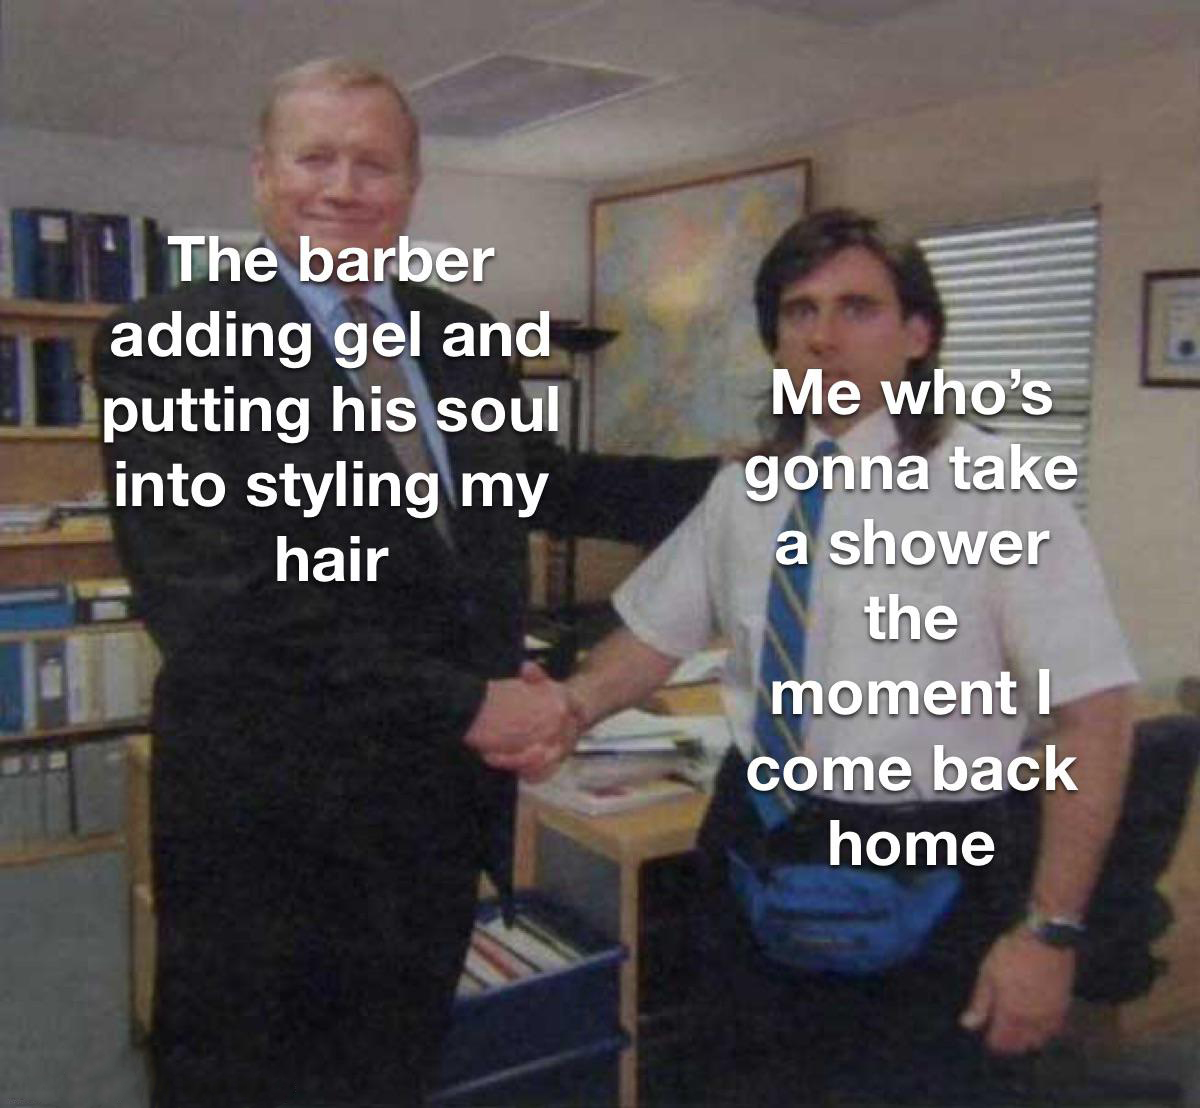 funny memes - dank memes - gandalf memes - The barber adding gel and putting his soul into styling my hair Me who's gonna take a shower the moment I come back home